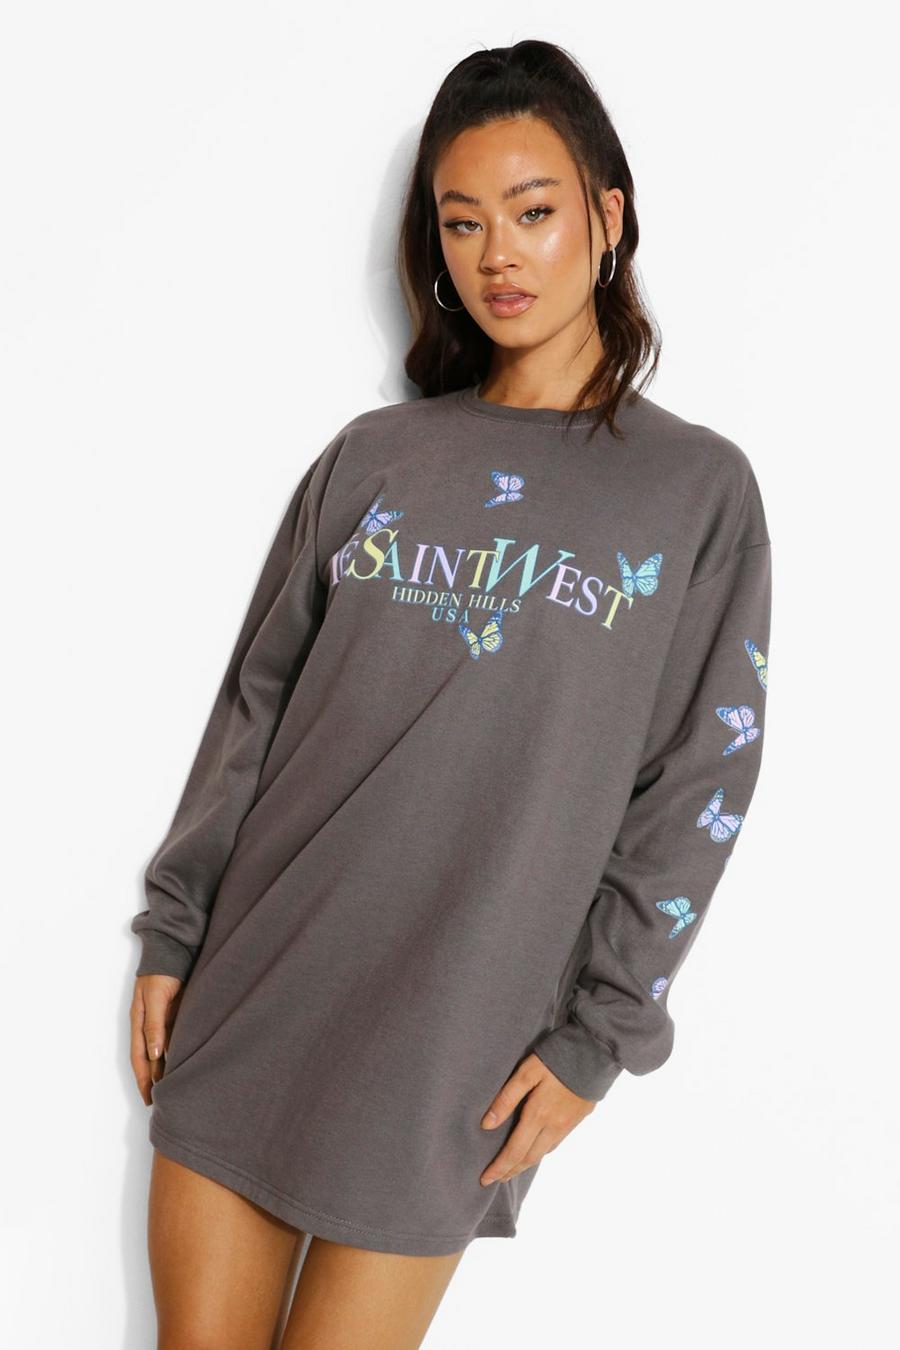 Charcoal Ye Saint West Butterfly Print Sweater Dress image number 1